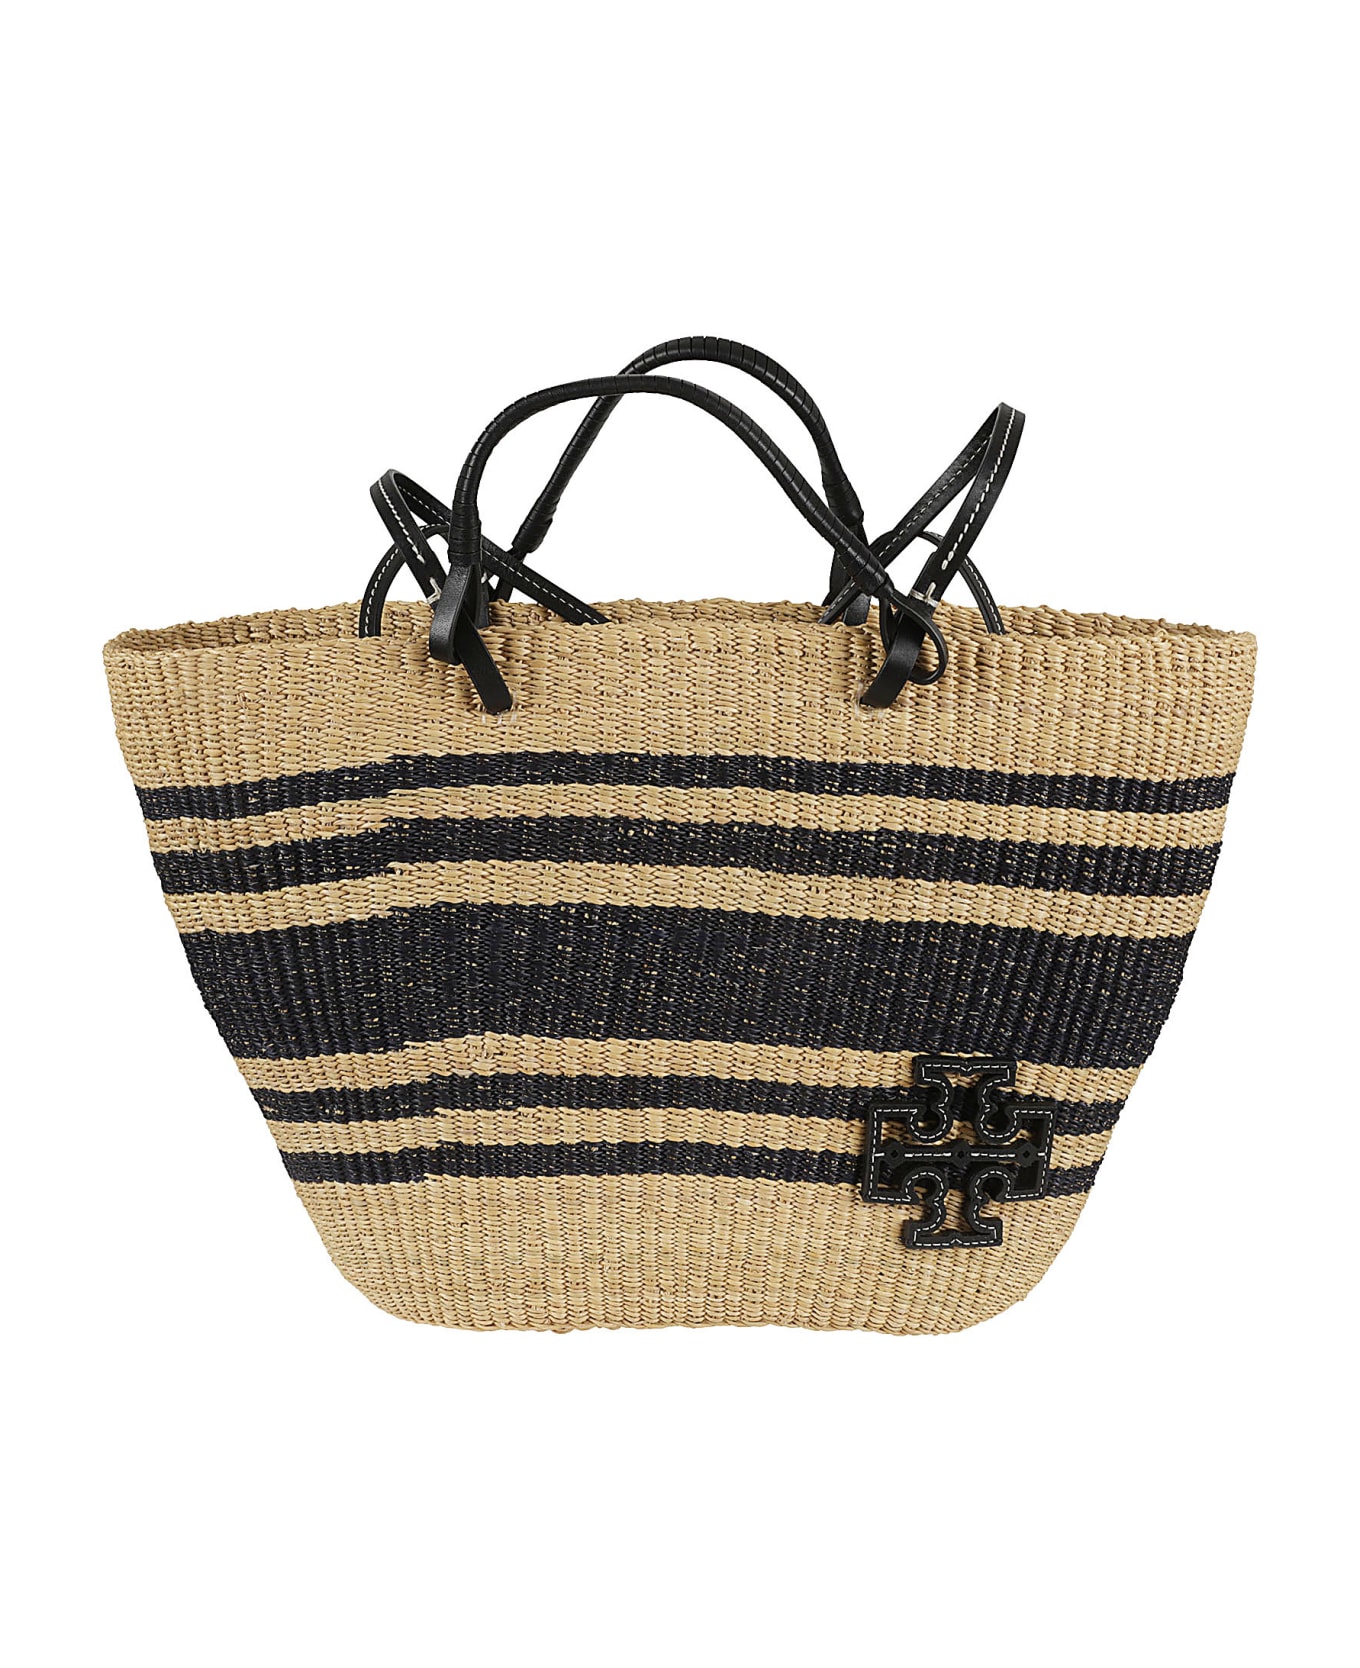 Tory Burch Weaved Tote トートバッグ